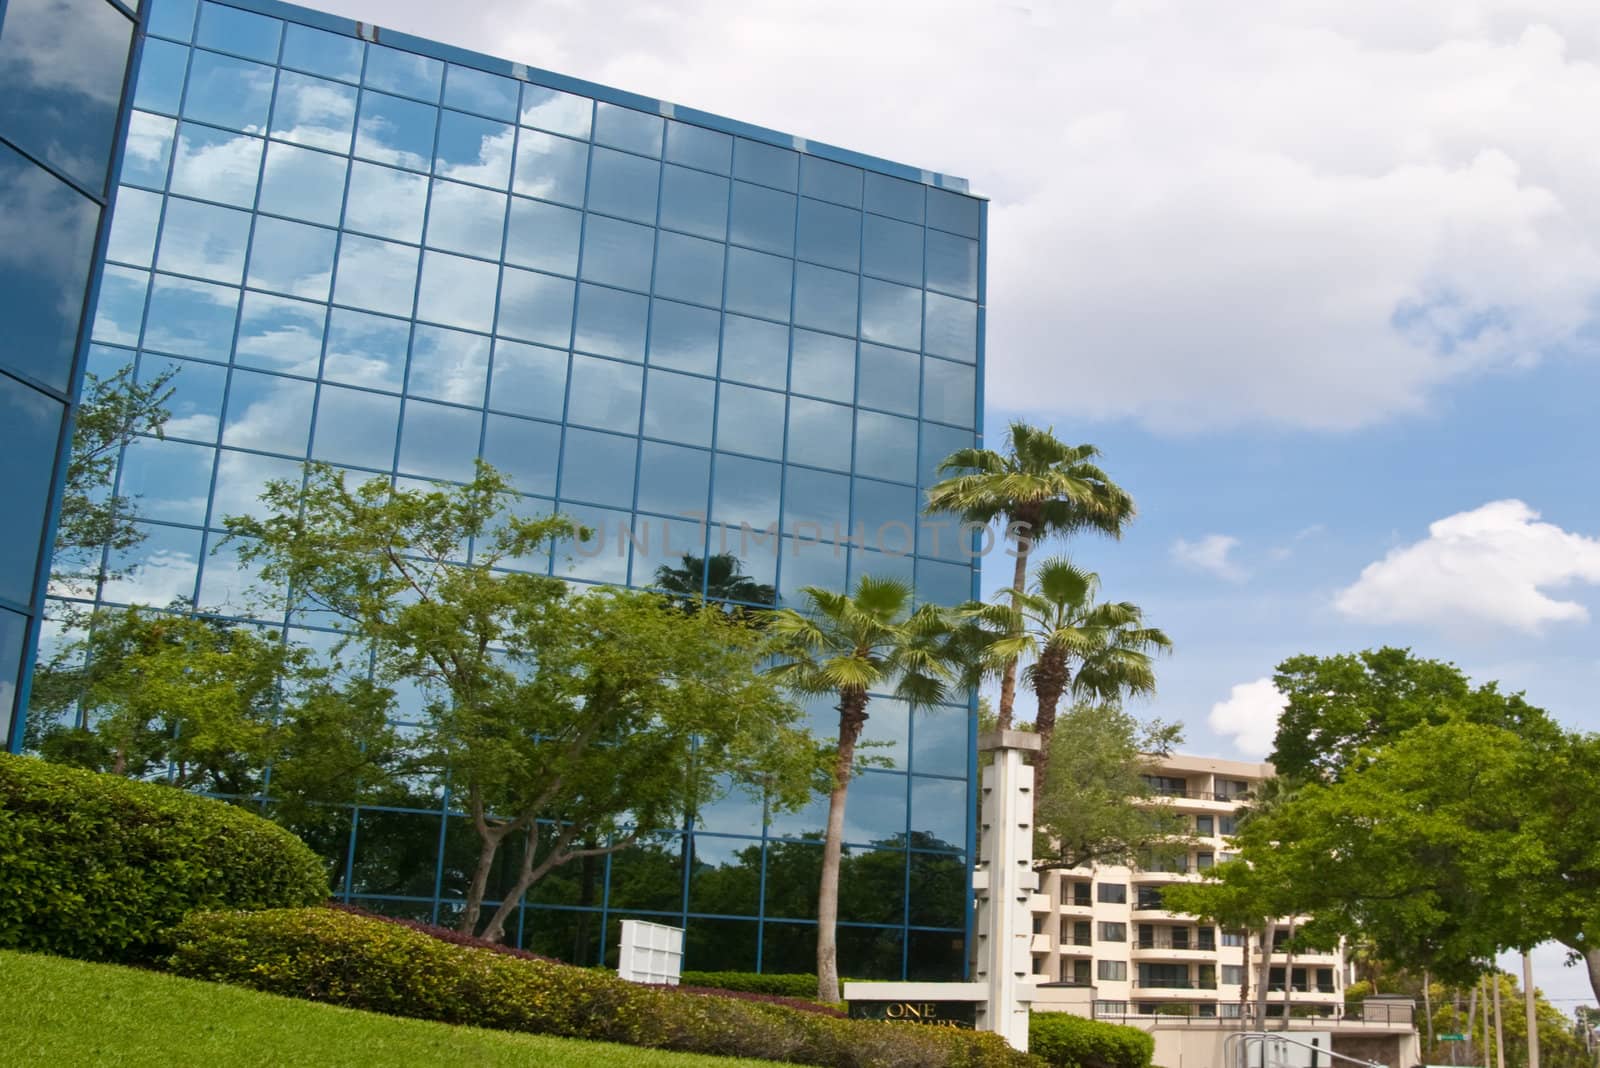 Mirrored office building in Florida